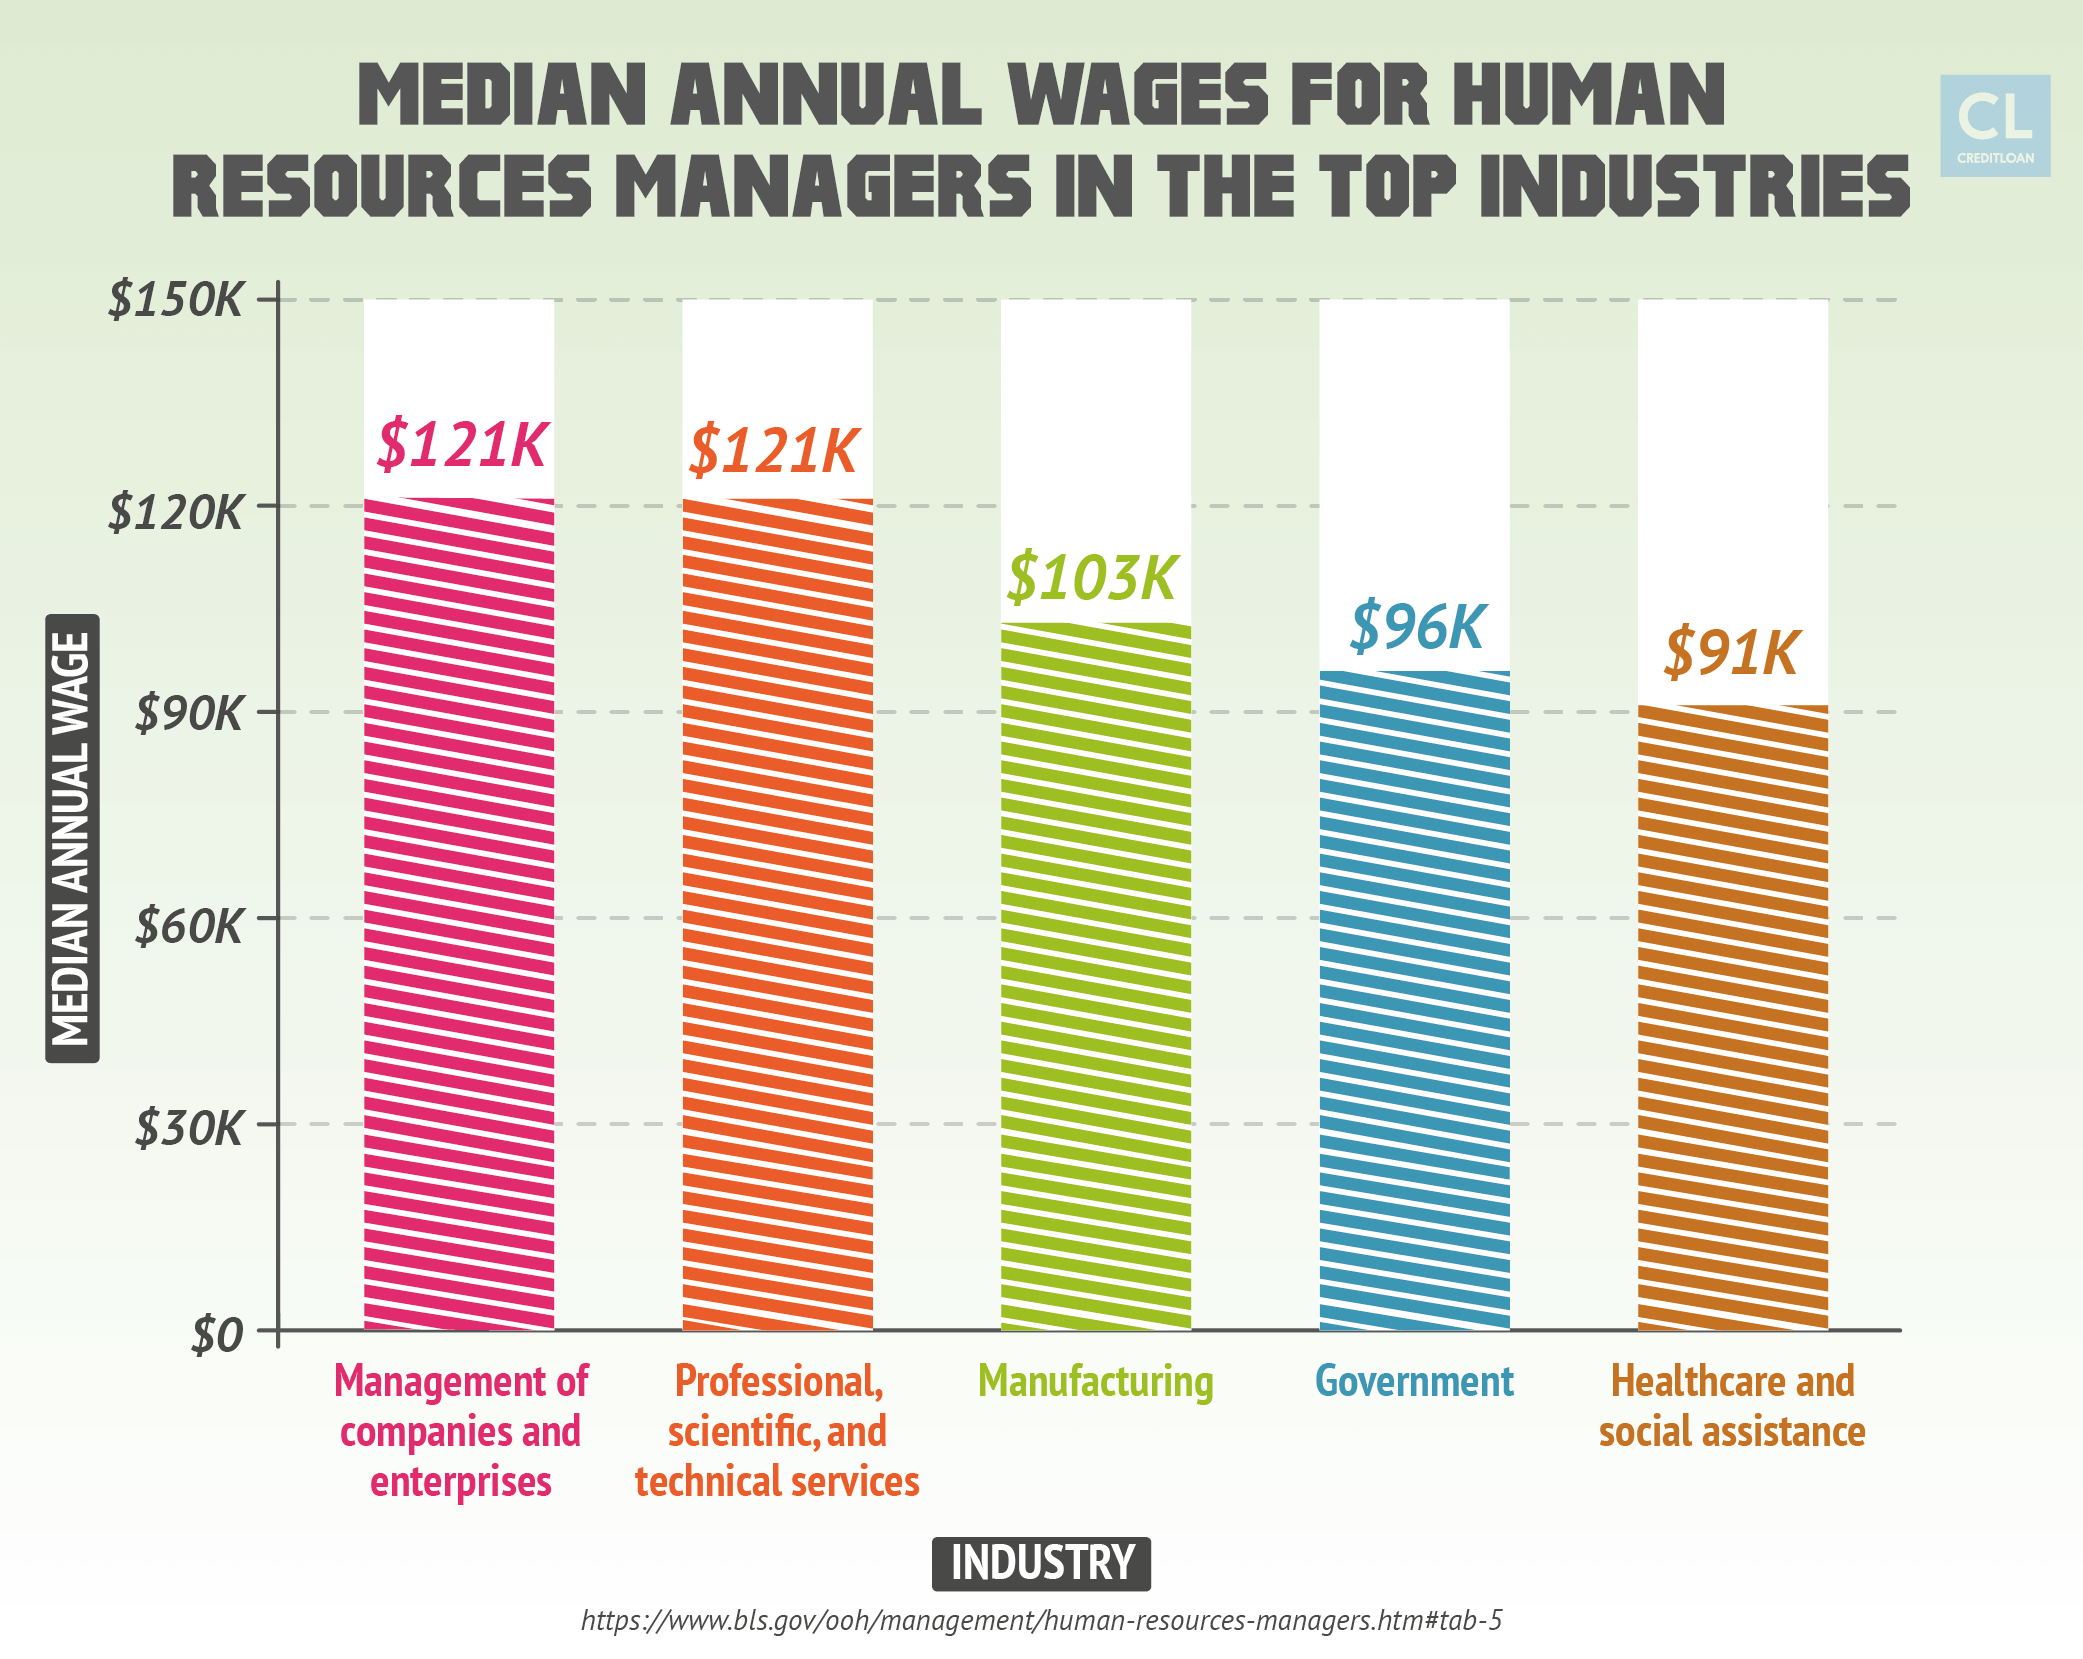 Median Annual Wages for Human Resources Managers in the Top Industries